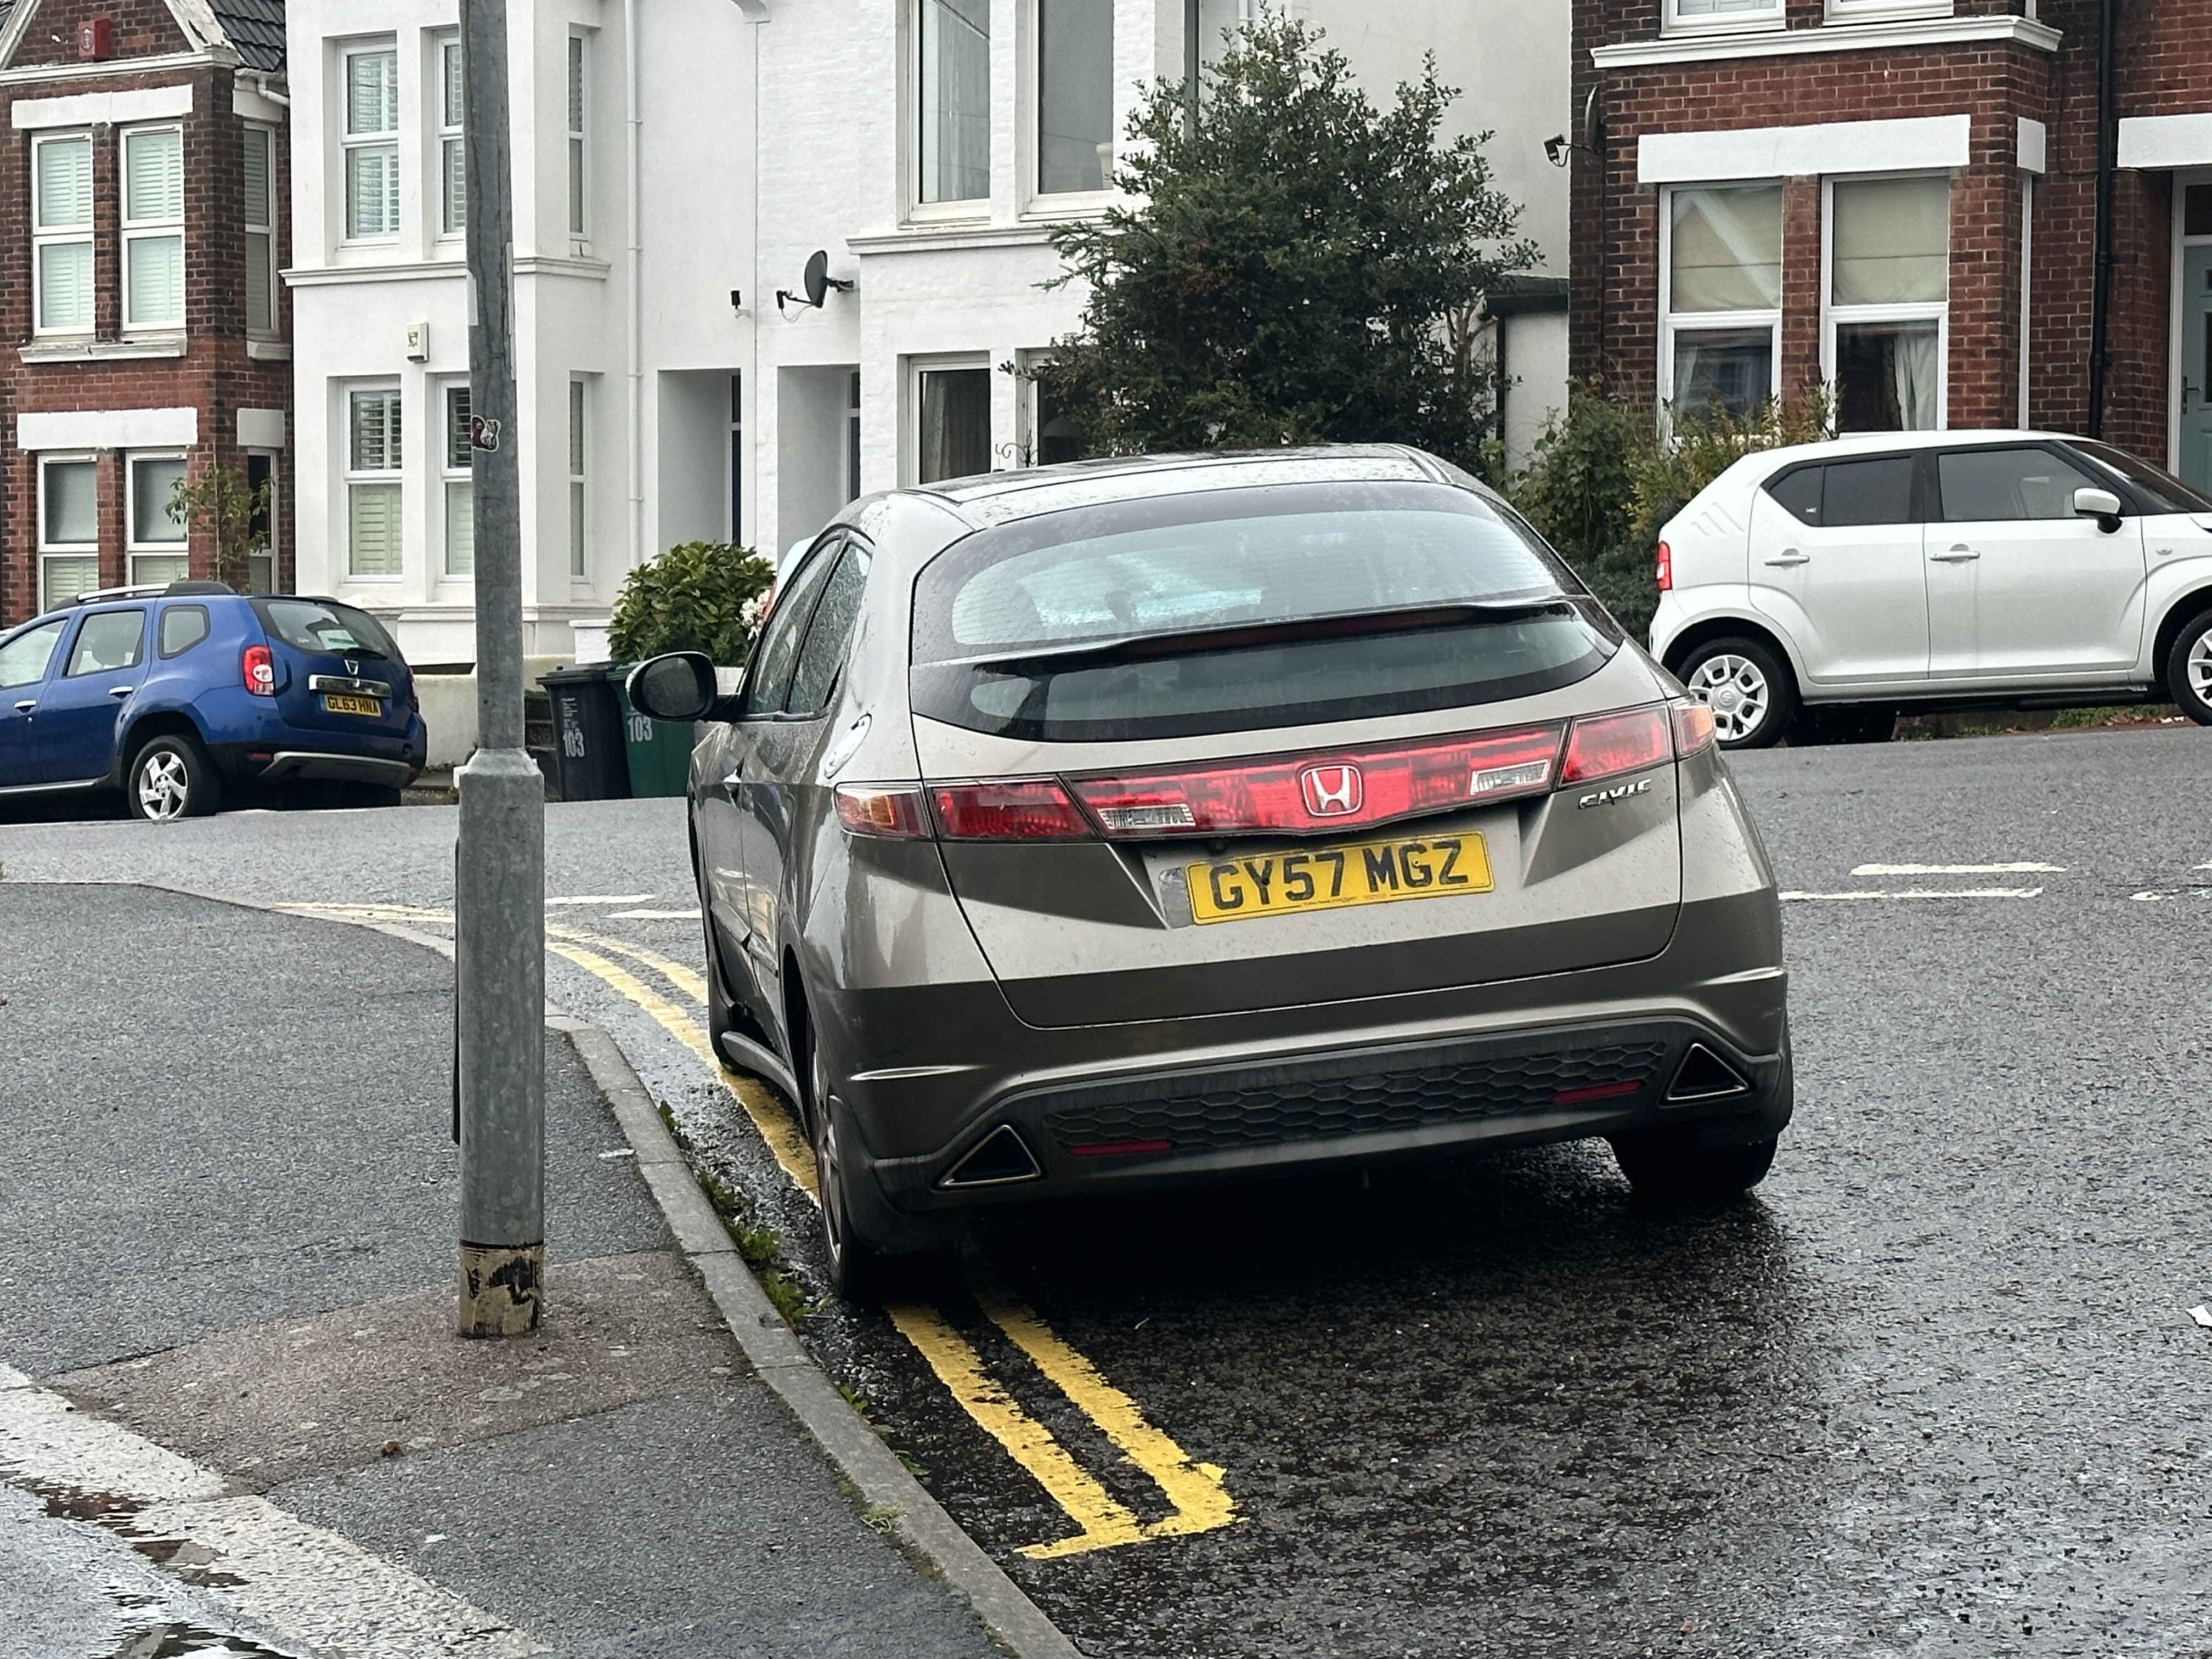 Photograph of GY57 MGZ - a Gold Honda Civic parked in Hollingdean by a non-resident. The first of three photographs supplied by the residents of Hollingdean.